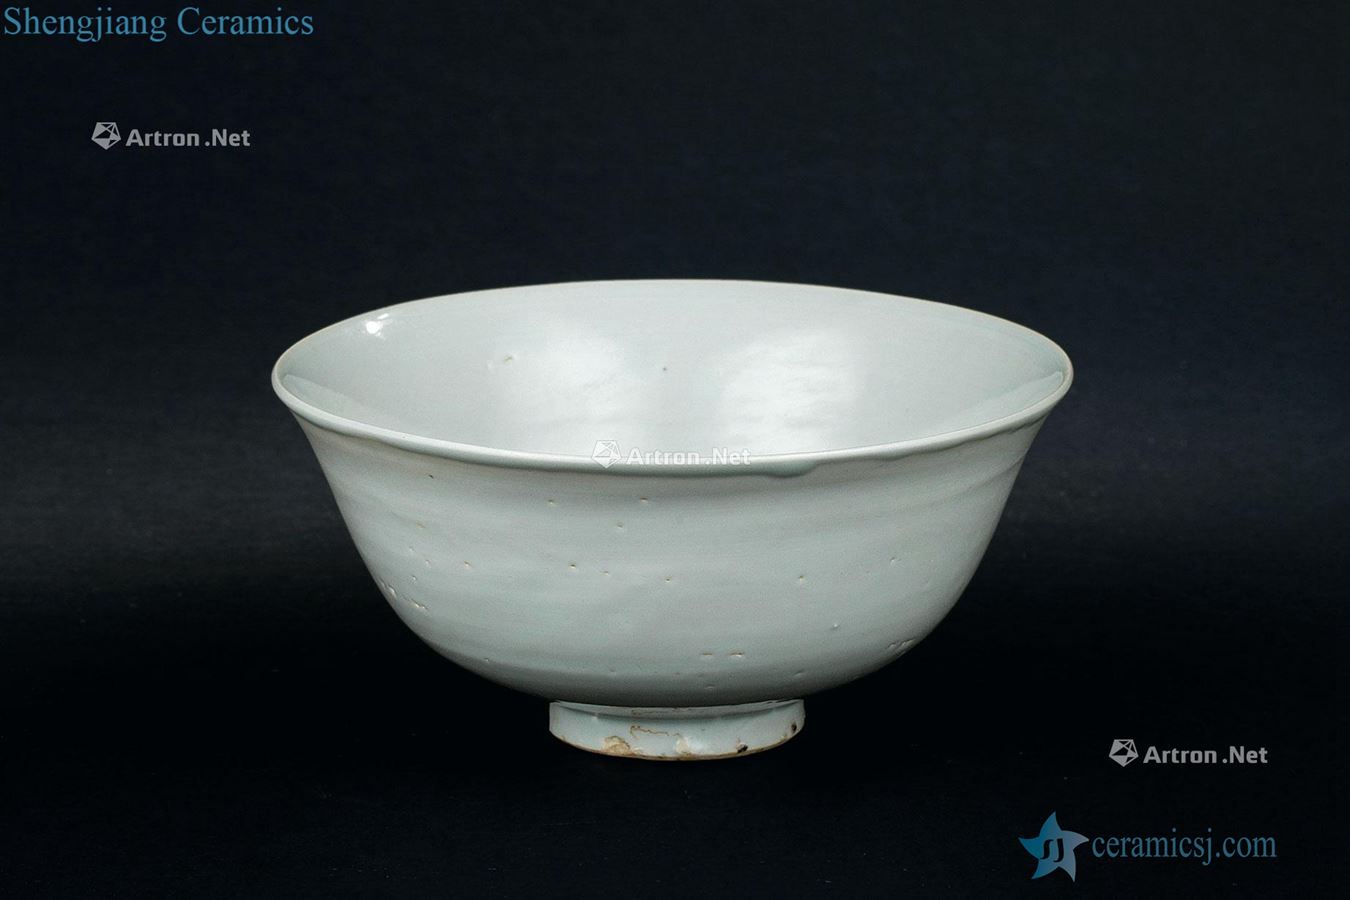 The yuan dynasty (1279-1368), white porcelain flowers green-splashed bowls